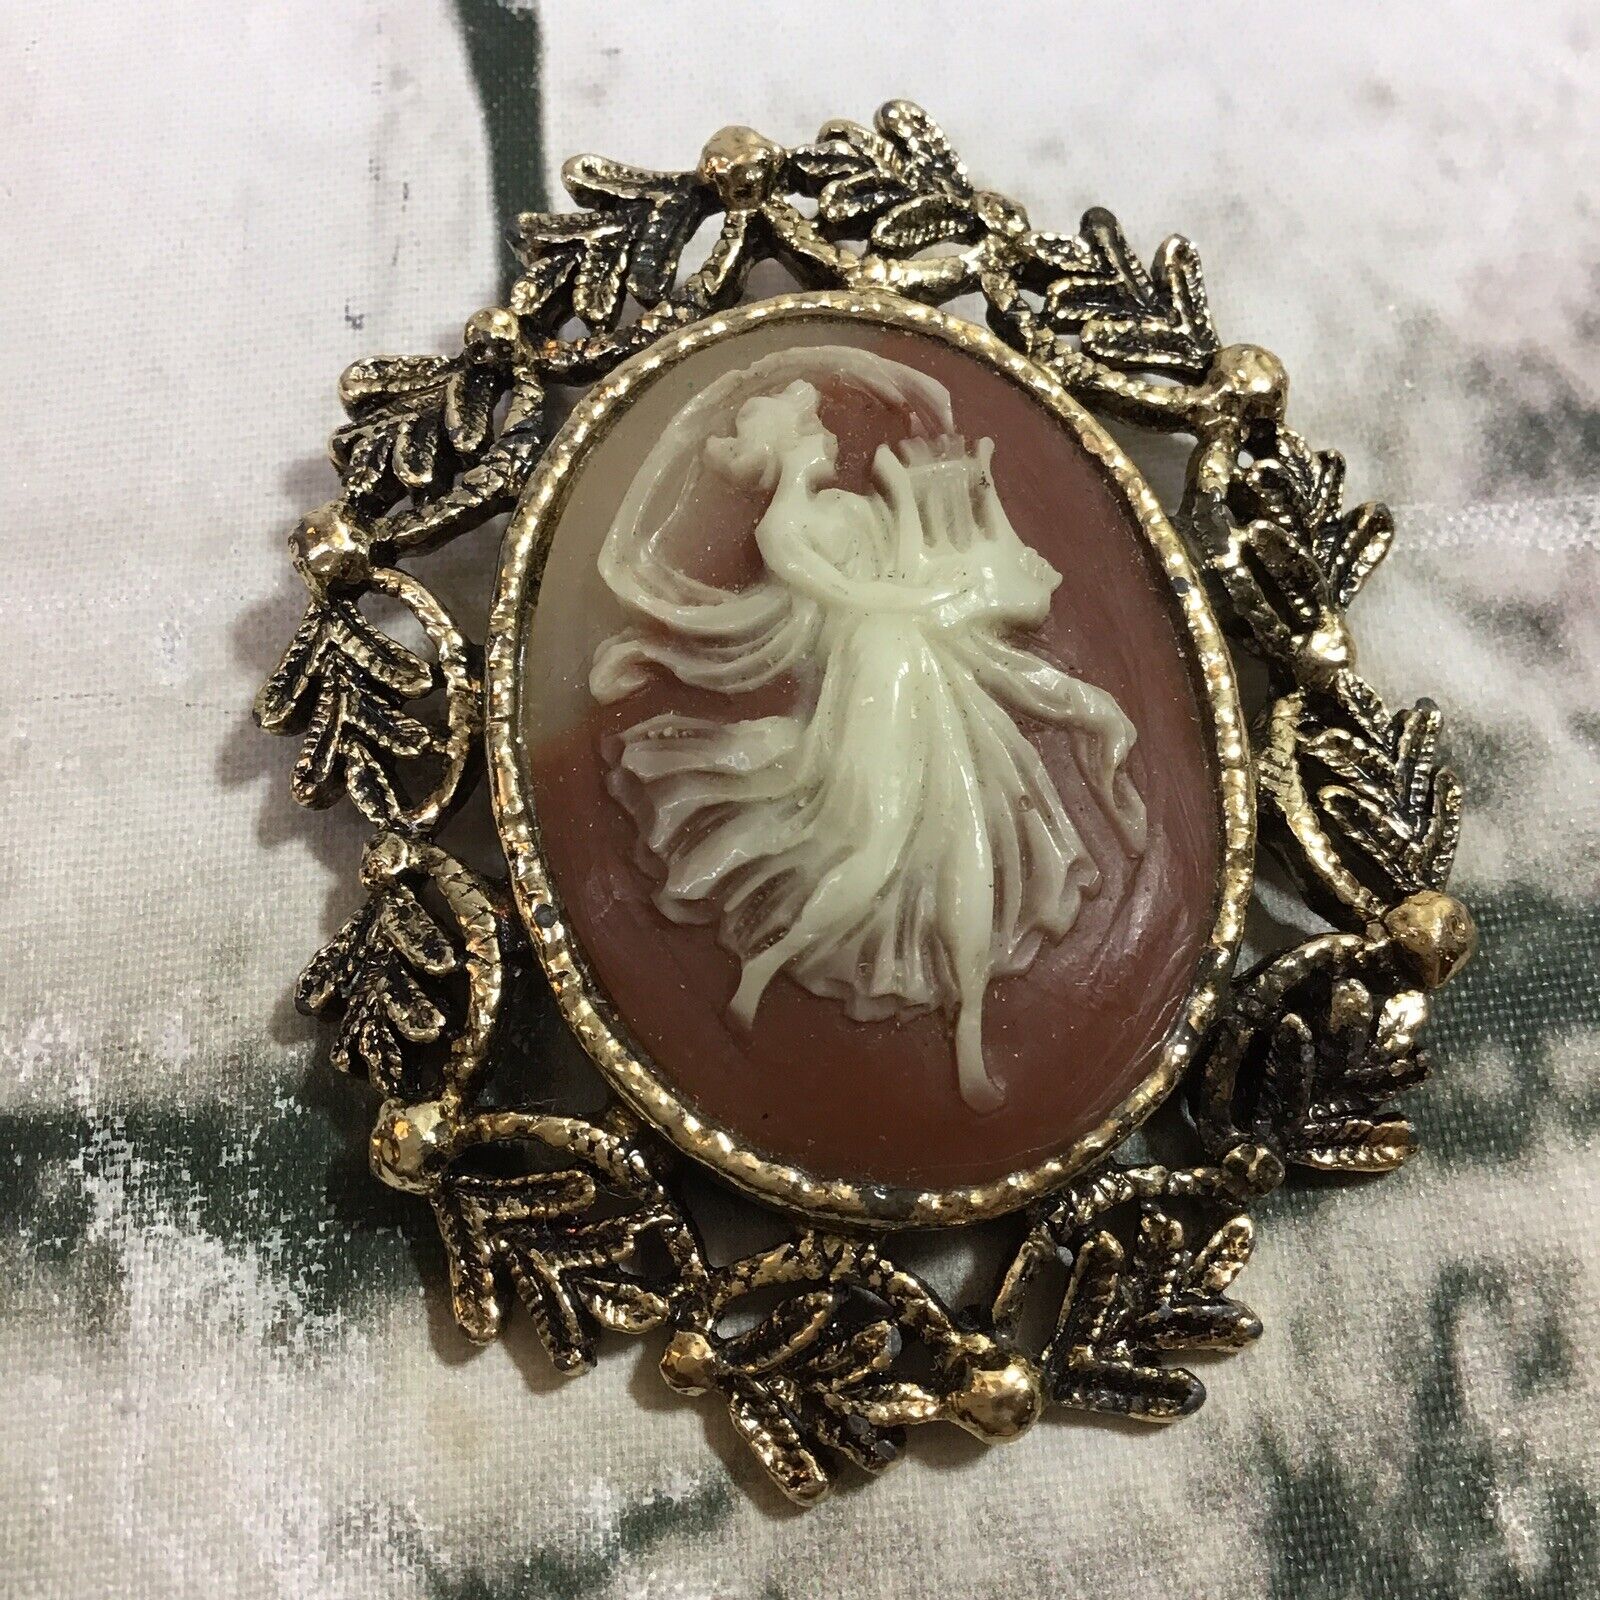 Vintage Cameo Ornate Oval Pendant Woman Playing Harp Collectible Jewelry 